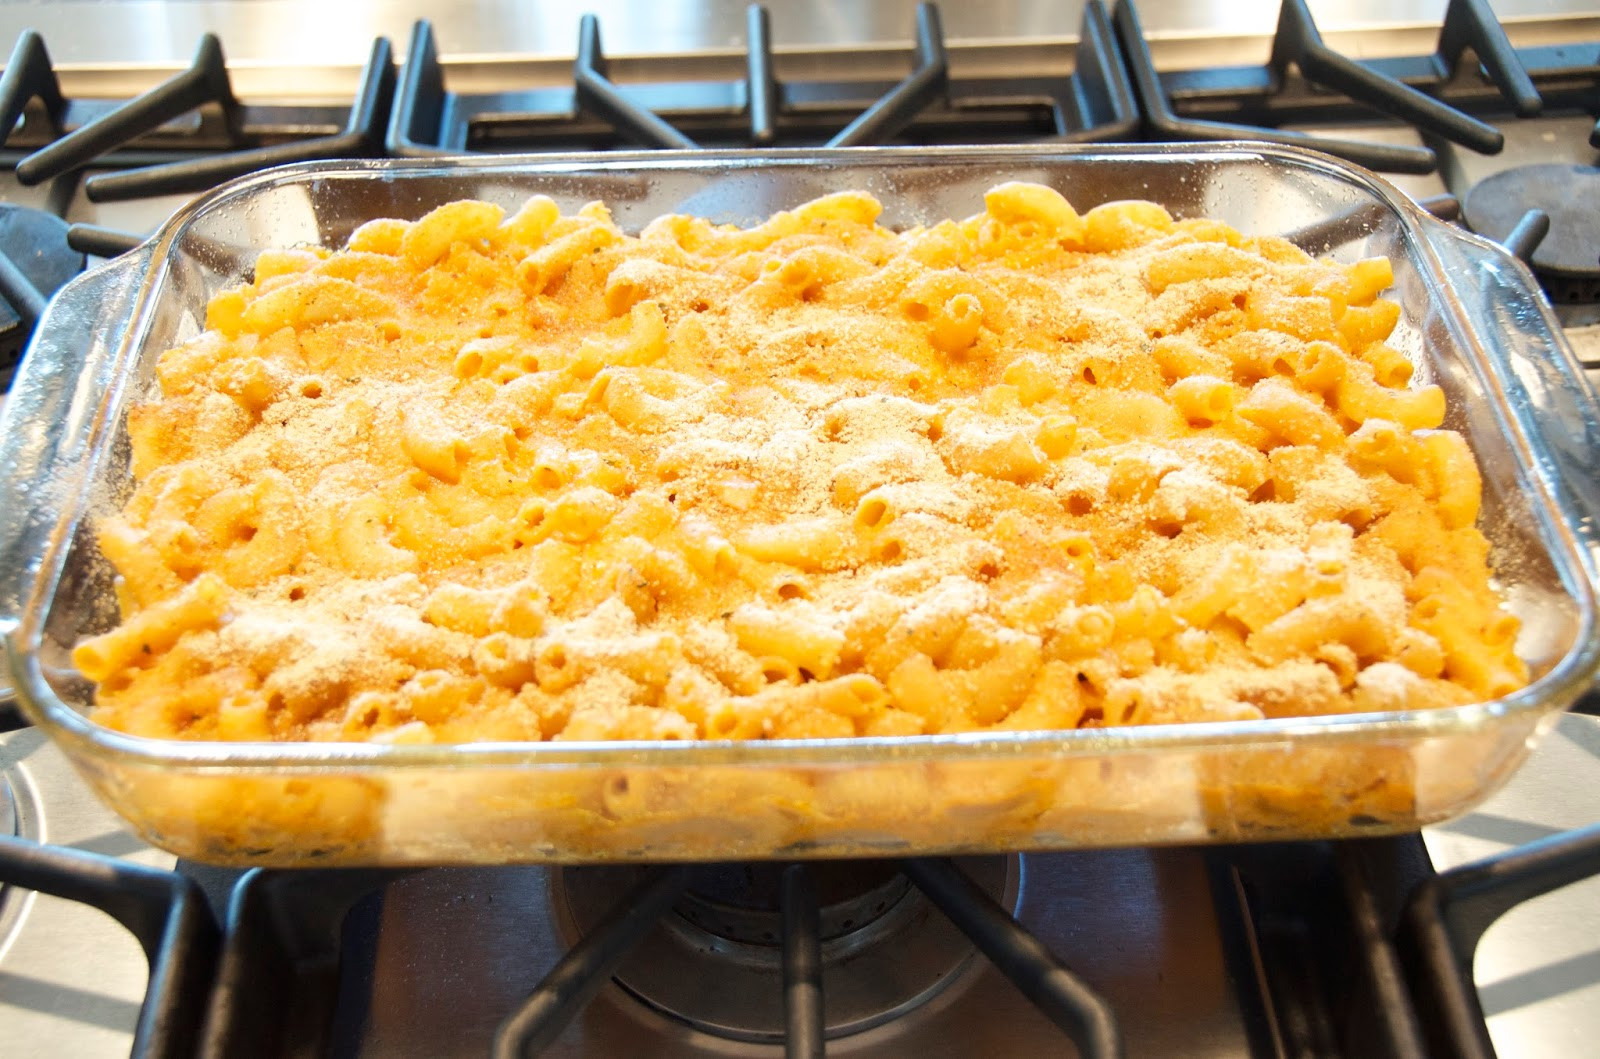 Best Baked Macaroni And Cheese Ever
 The Vegan Paige Chloe s "Best Ever Baked Macaroni